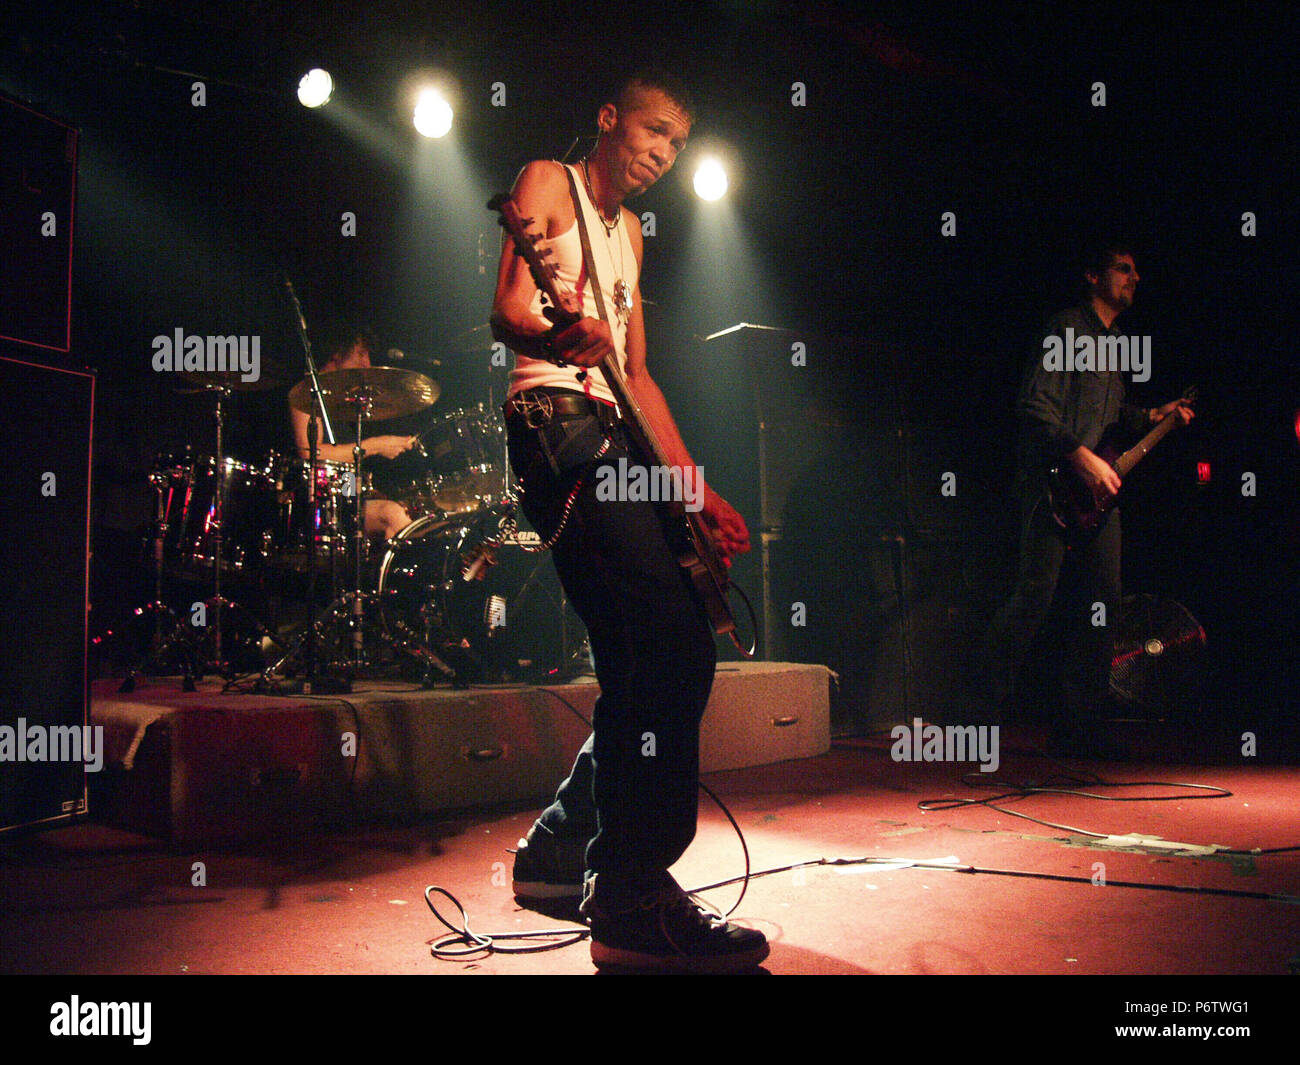 ATHENS, GA - January 31: Jerry Gaskill, Doug Pinnick, and Ty Tabor of King's X perform at the 40 Watt Club in Athens, Georgia on January 31, 2002. CREDIT: Chris McKay / MediaPunch Stock Photo